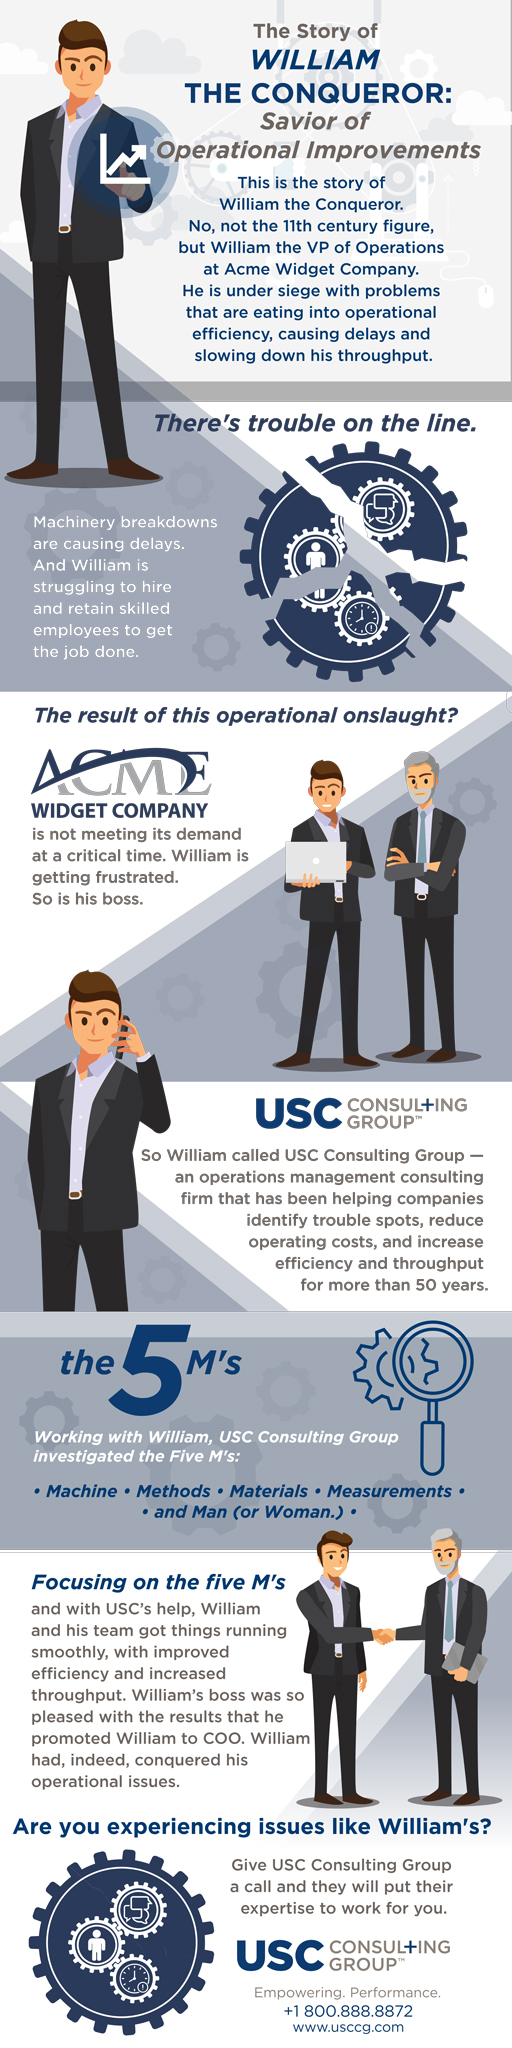 The Story of William the Conqueror - Savior of Operational Improvements infographic